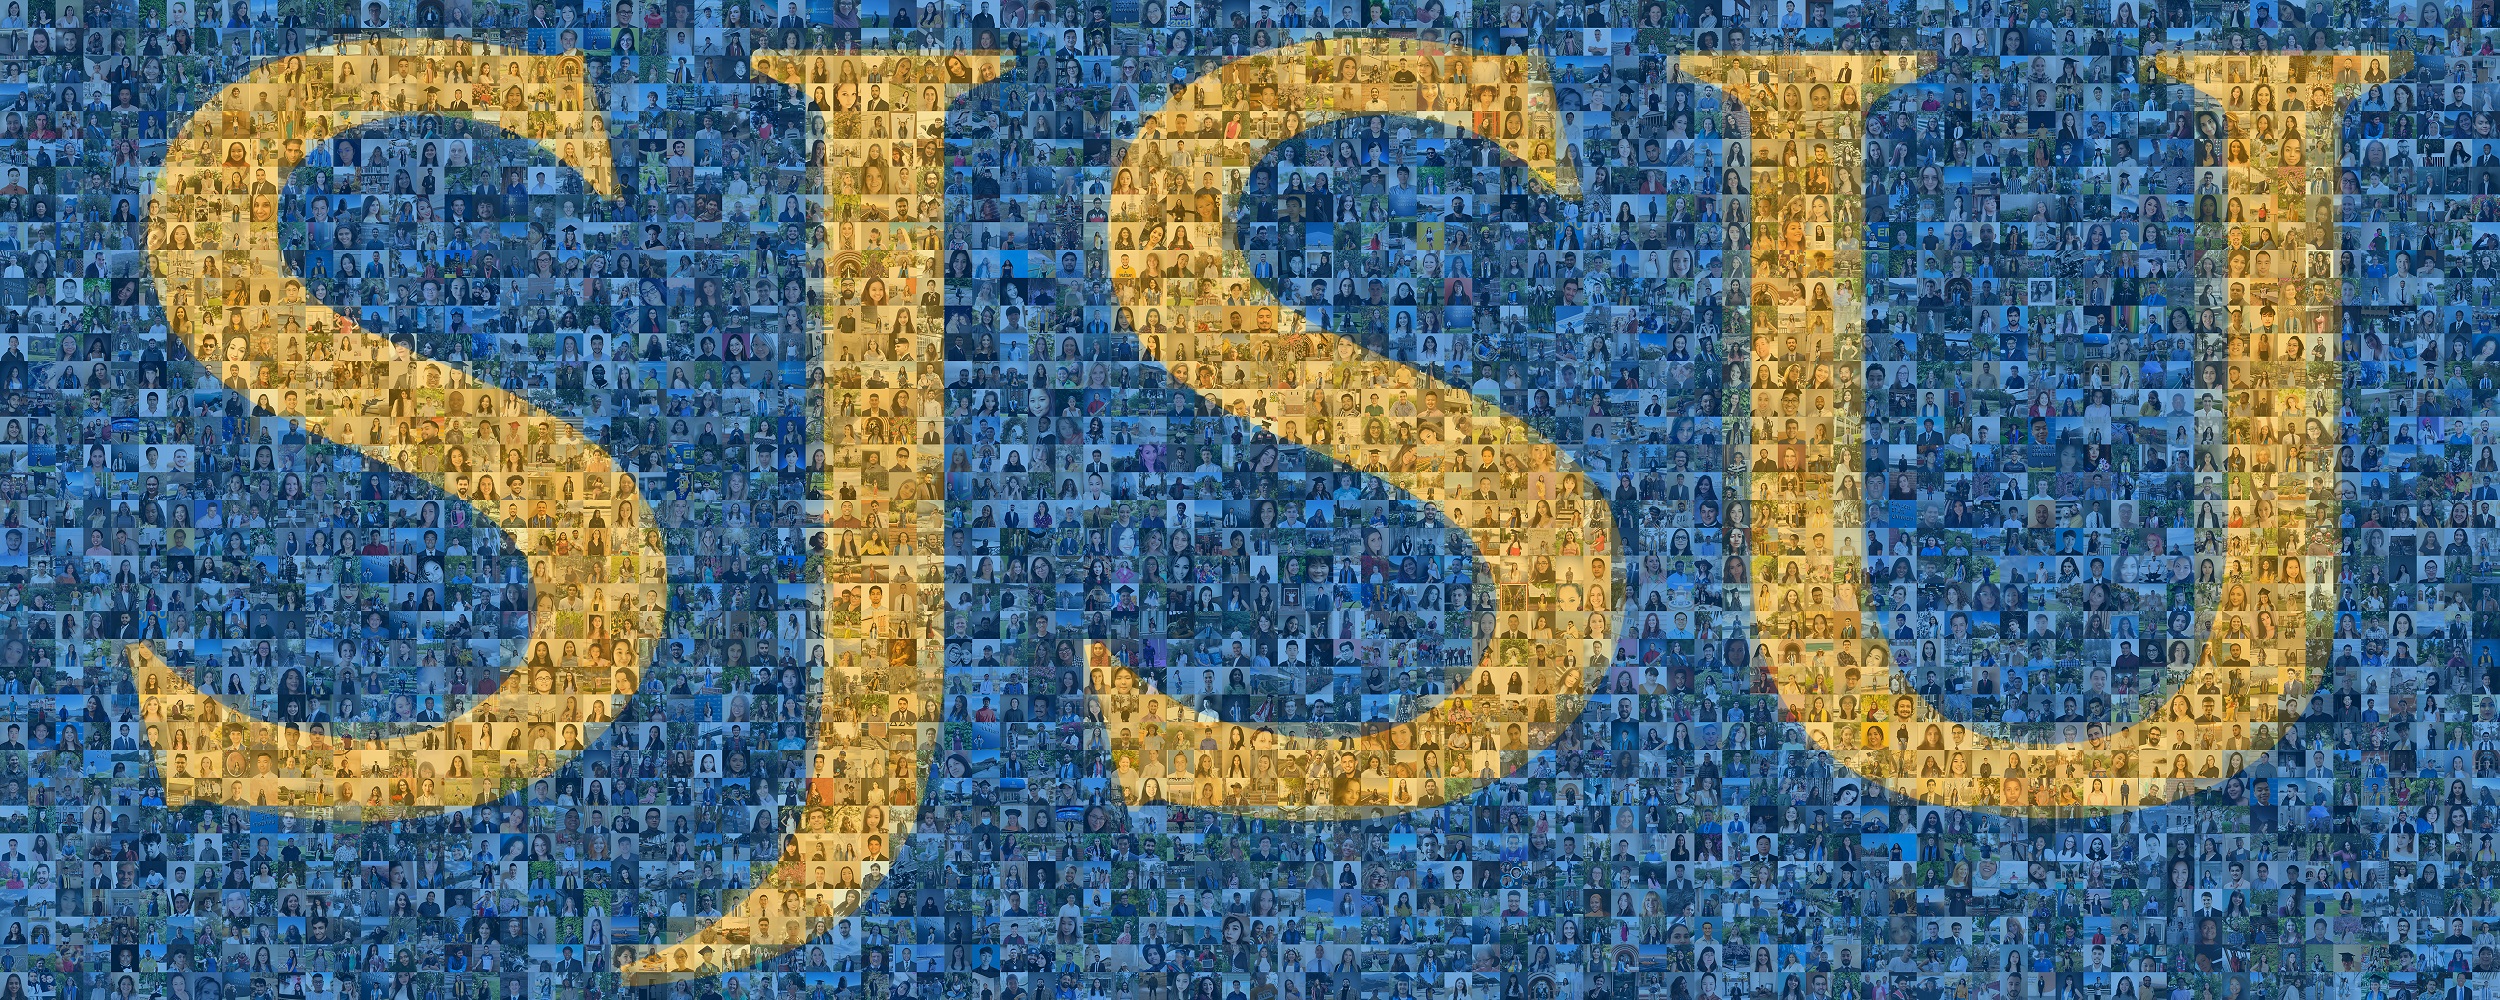 Mosaic picture